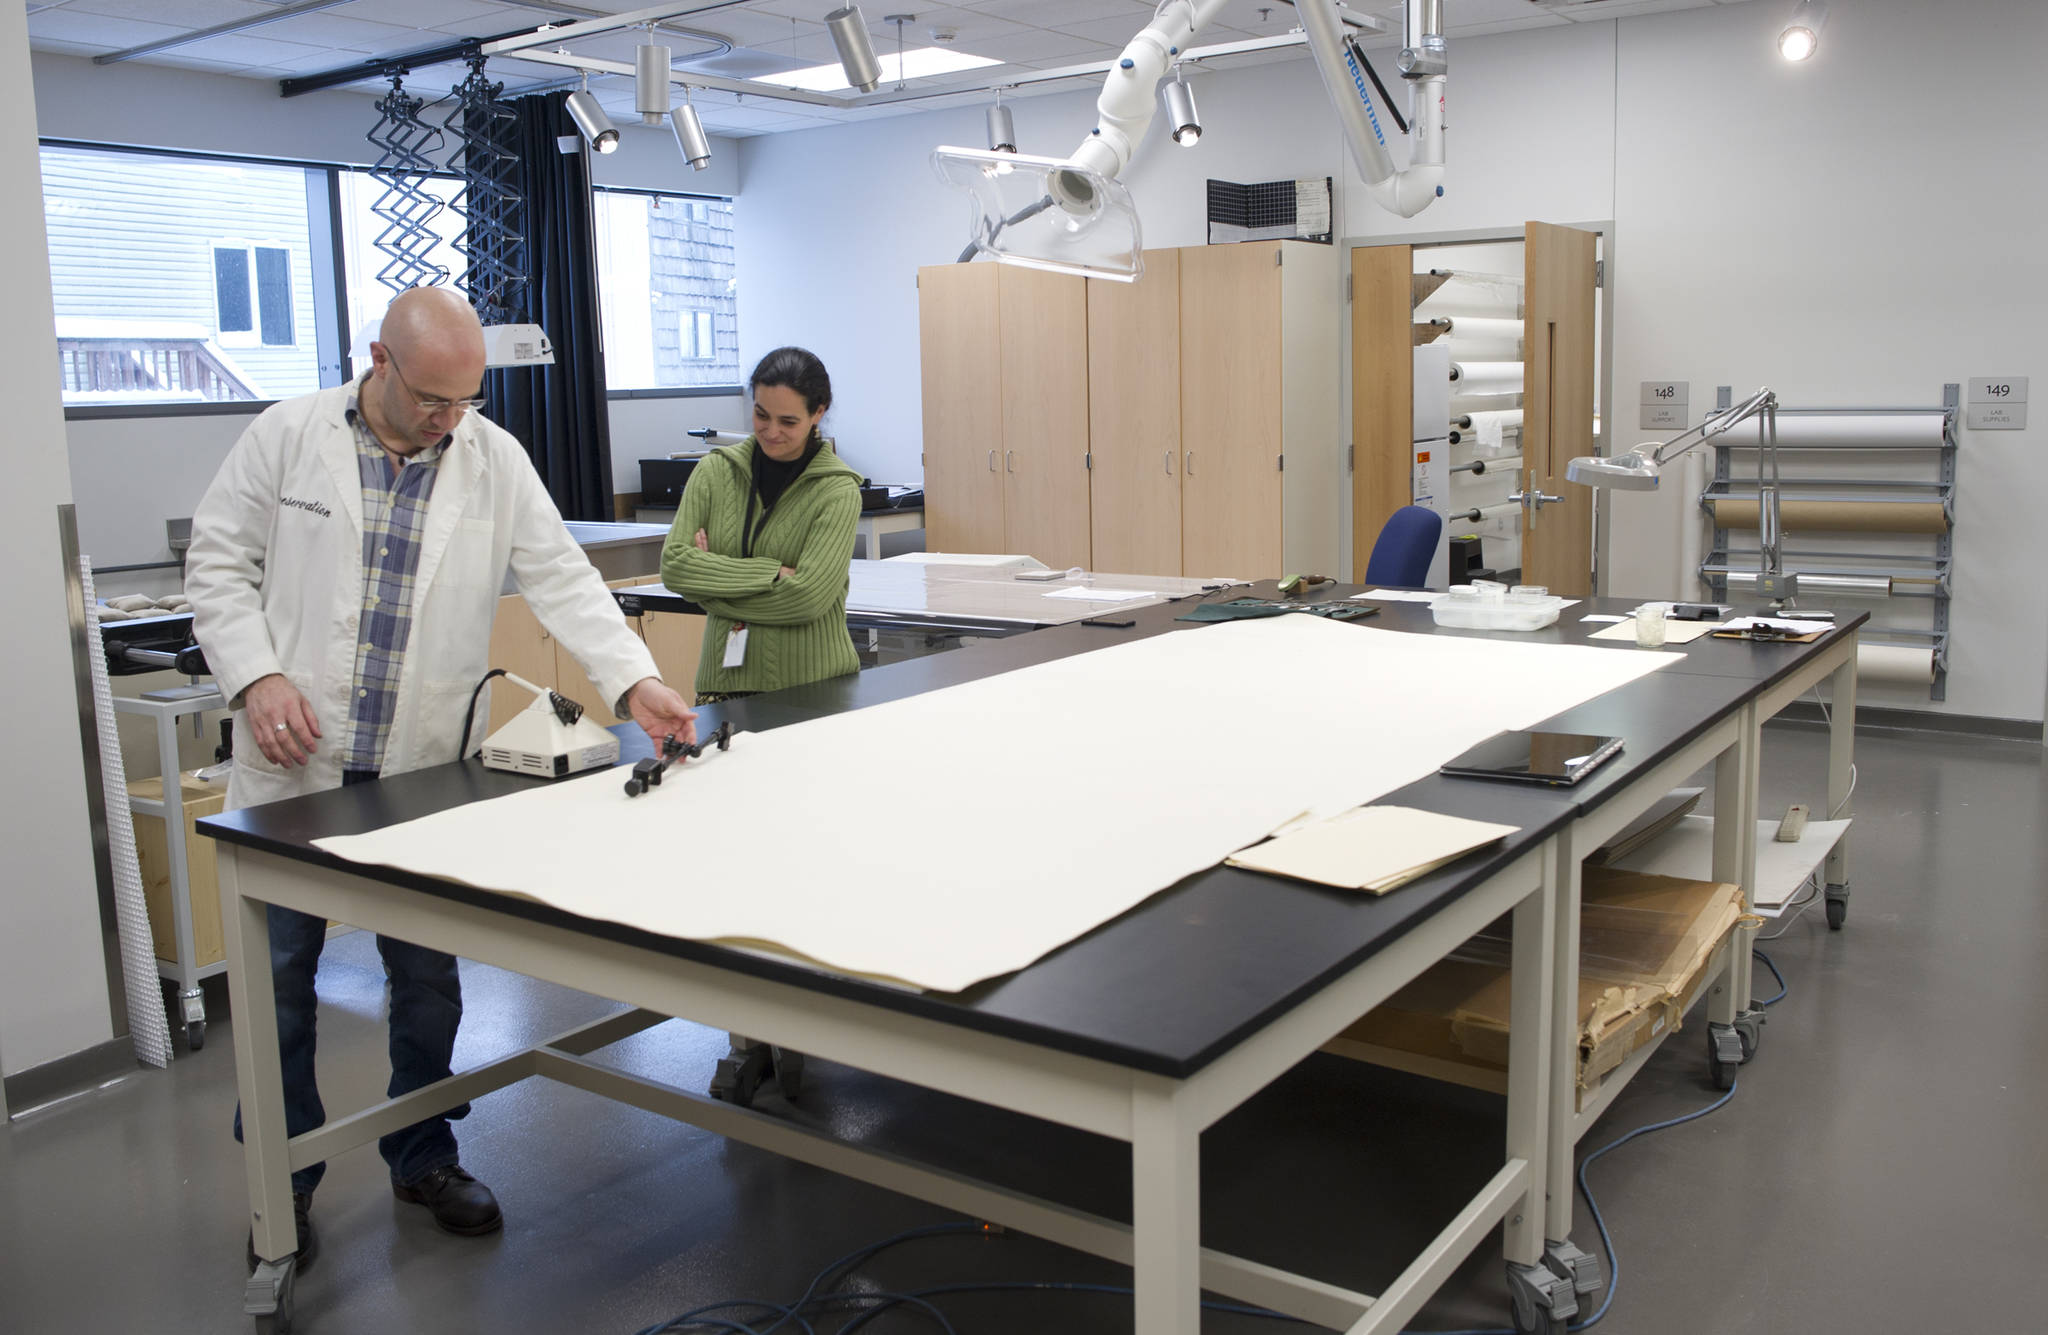 Ellen Carrlee, objects conservator at the Alaska State Museum, watches Seth Irwin, a paper conservator from Boston, working at the Alaska State Museum on Sesquicentennial documents that will go on display later this year. (Michael Penn | Juneau Empire)